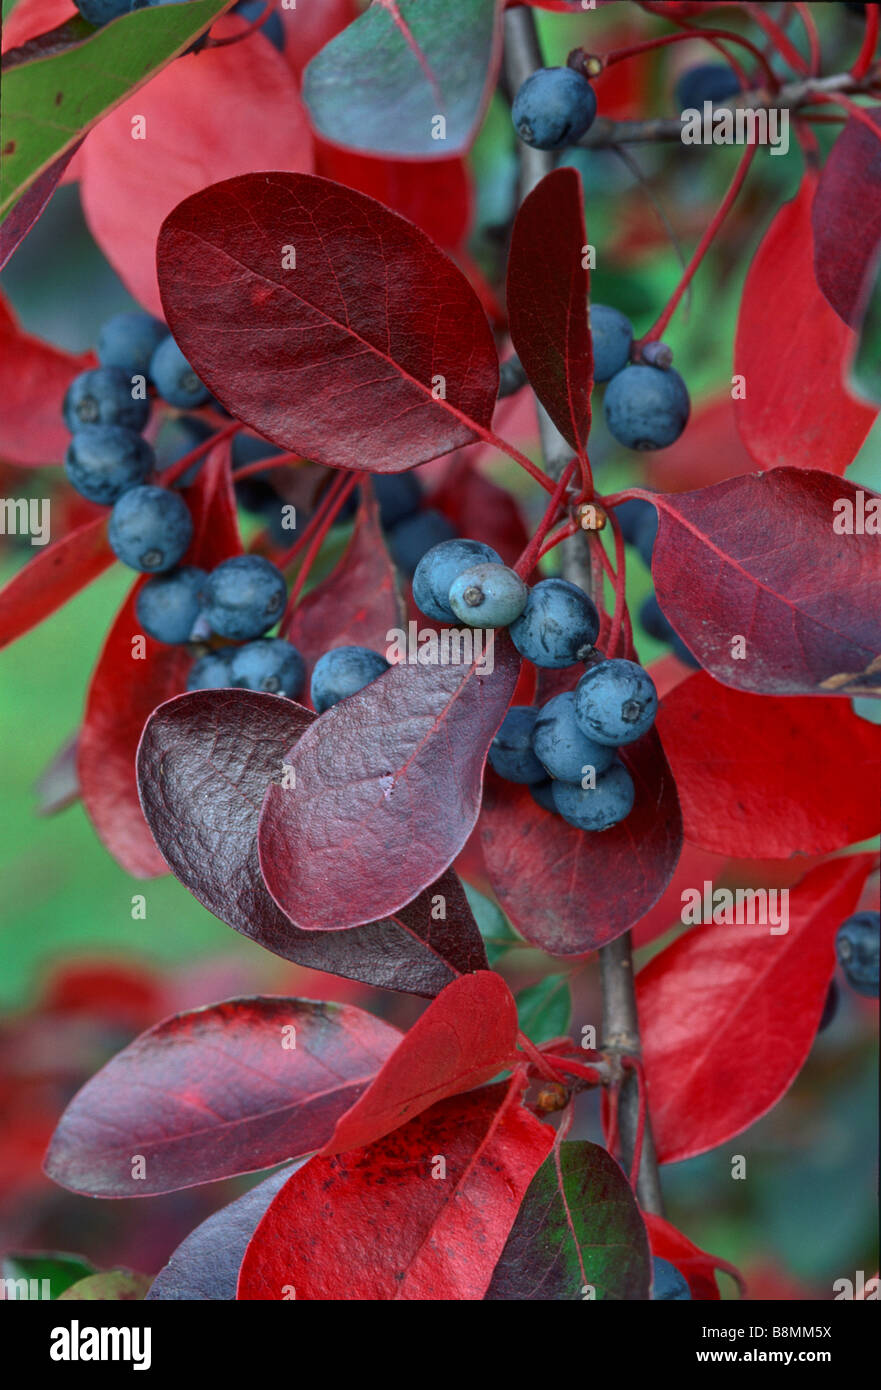 Nyssa sylvatica (black tupleo or sour gum) is a native North American tree, shown here in fall color. The fruits attract birds. Stock Photo